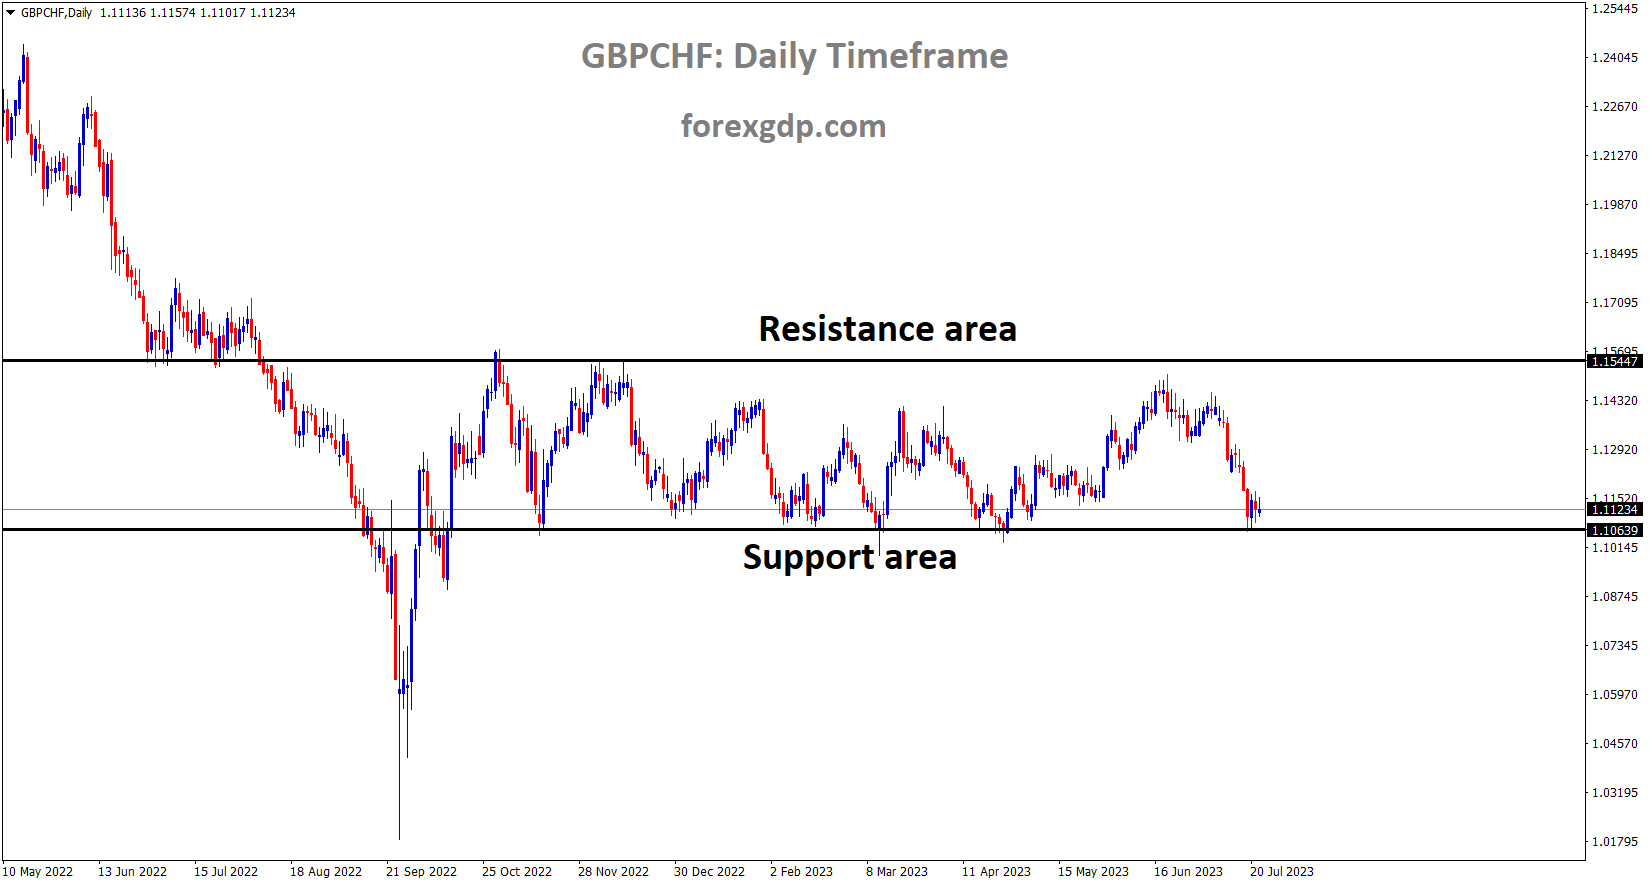 GBPCHF is moving in the Box pattern and the market has reached the horizontal support area of the pattern 2